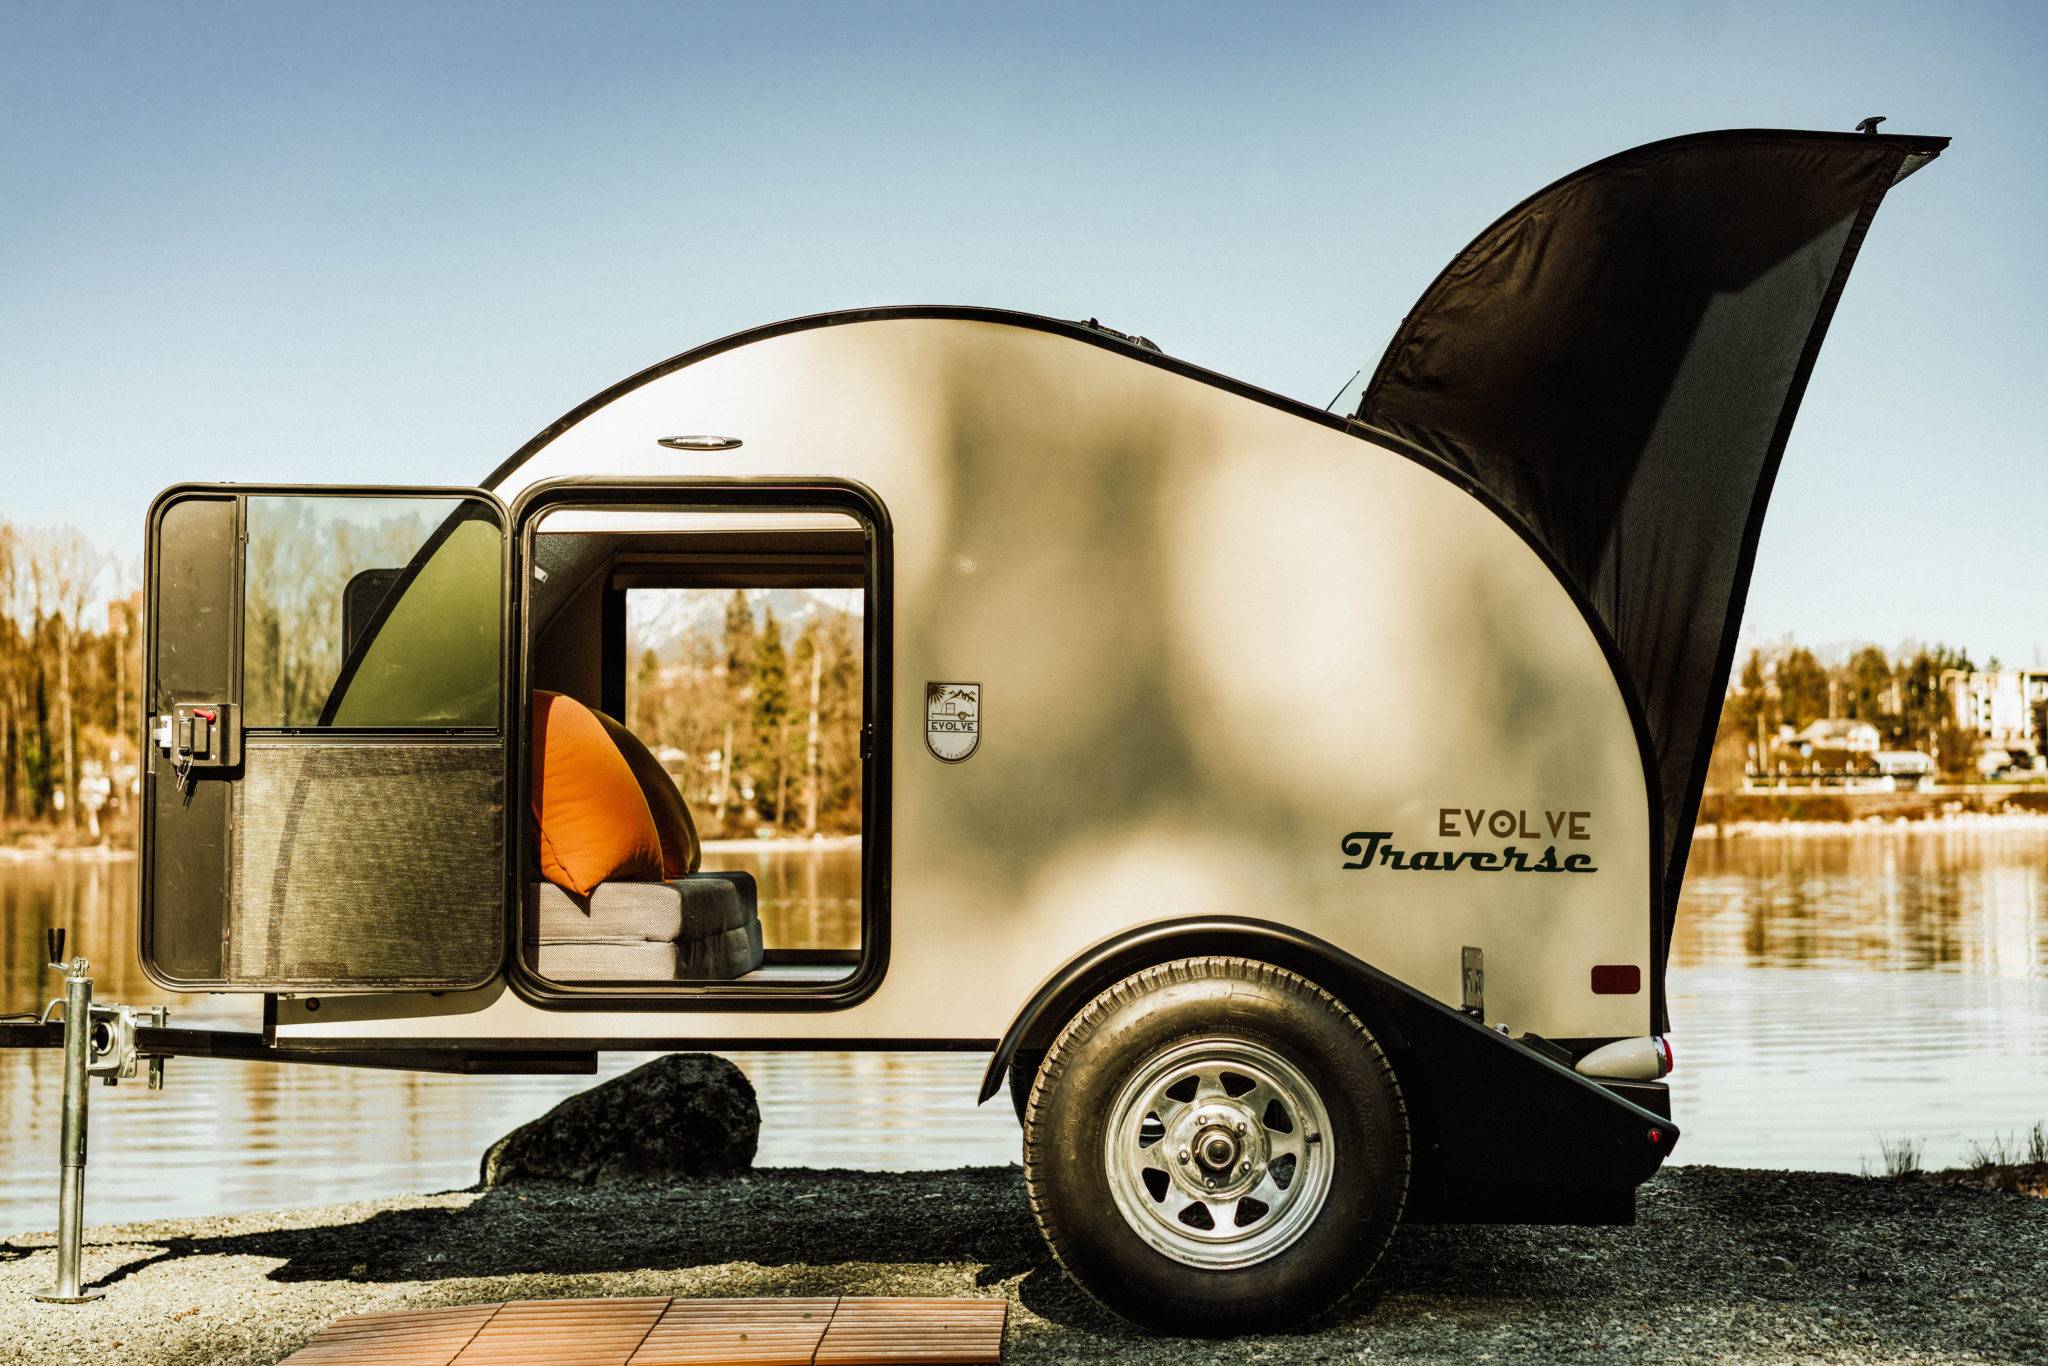 The ultralight and compact Evolve Traverse Solar Teardrop Trailer by the lake